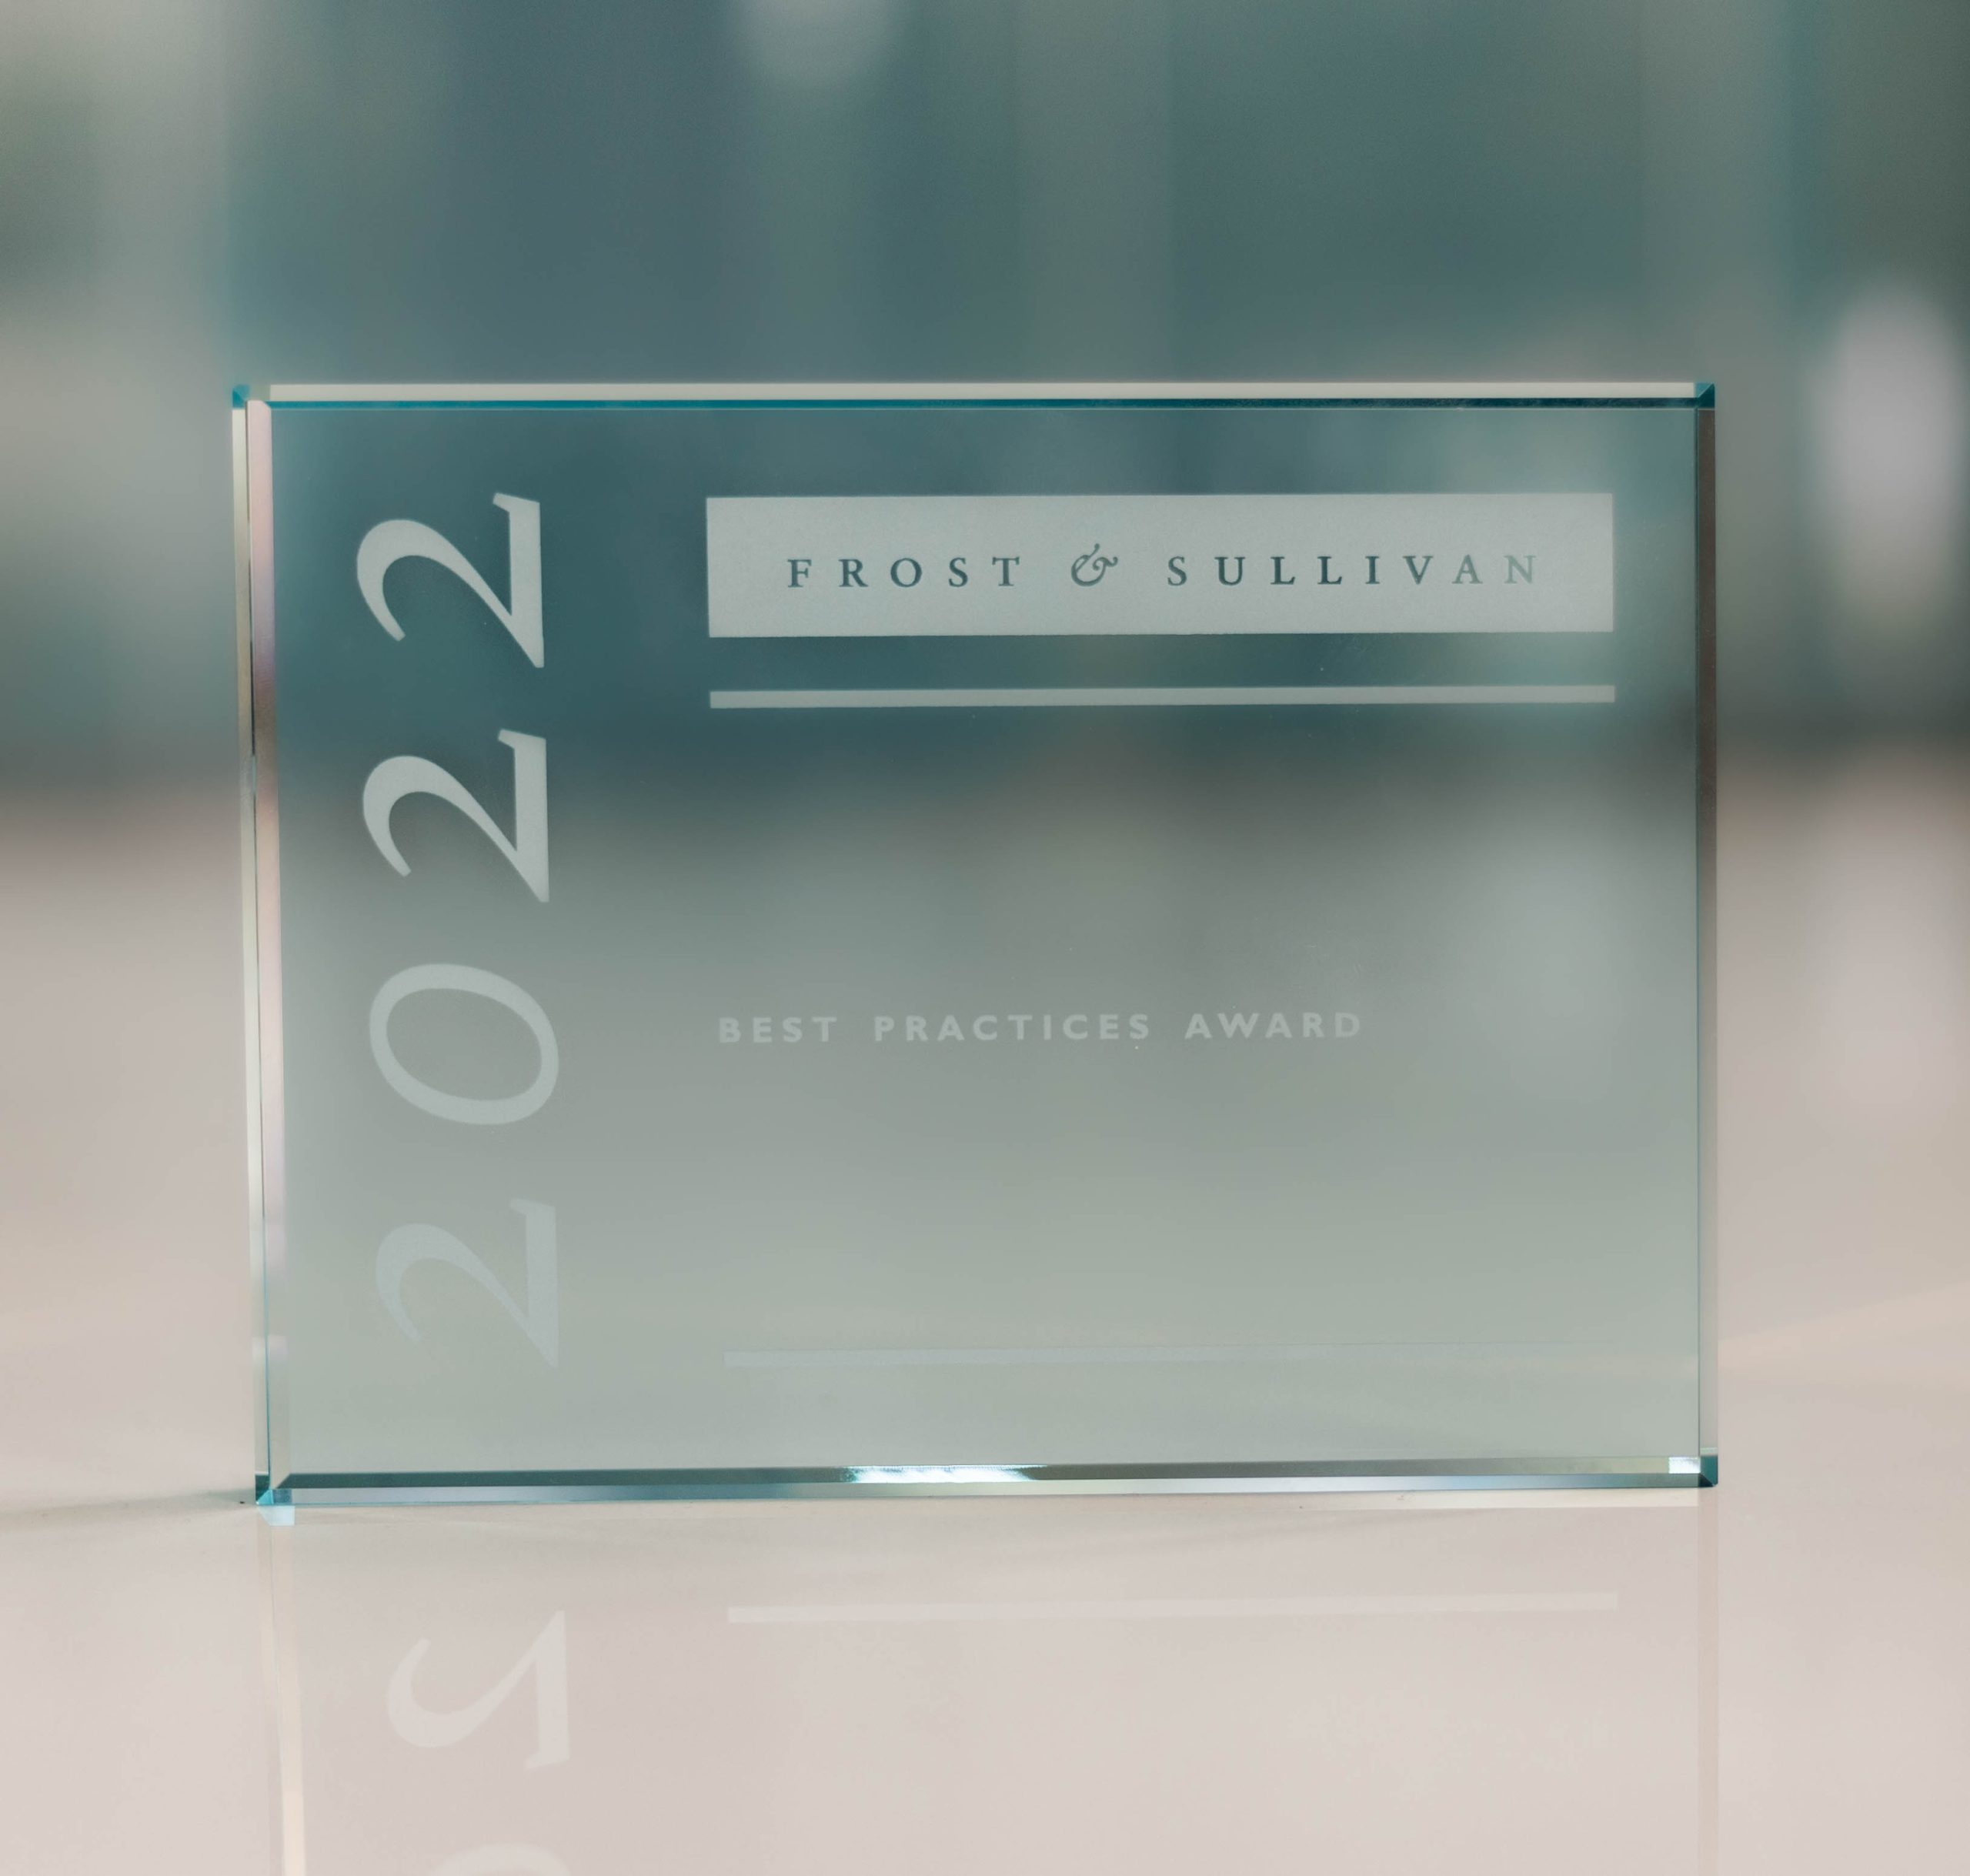 Frost & Sullivan Honors Leading Organizations at the 10th Edition of its Best Practices Virtual Awards Ceremony